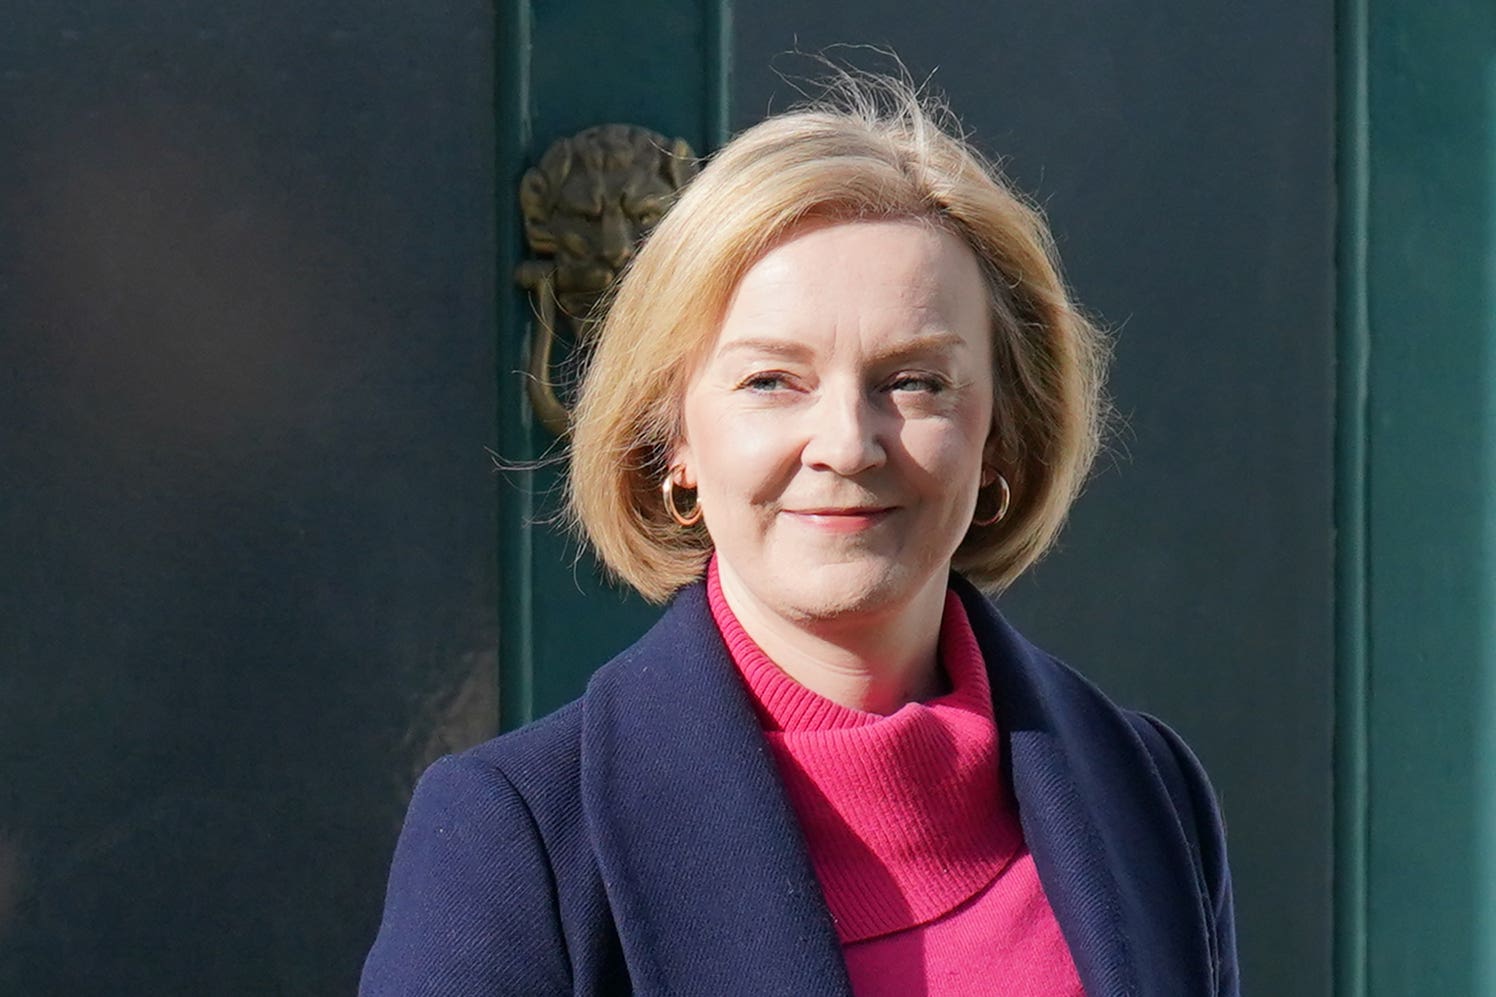 Liz Truss blocked the OBR from releasing forecasts in the lead-up to her mini-Budget